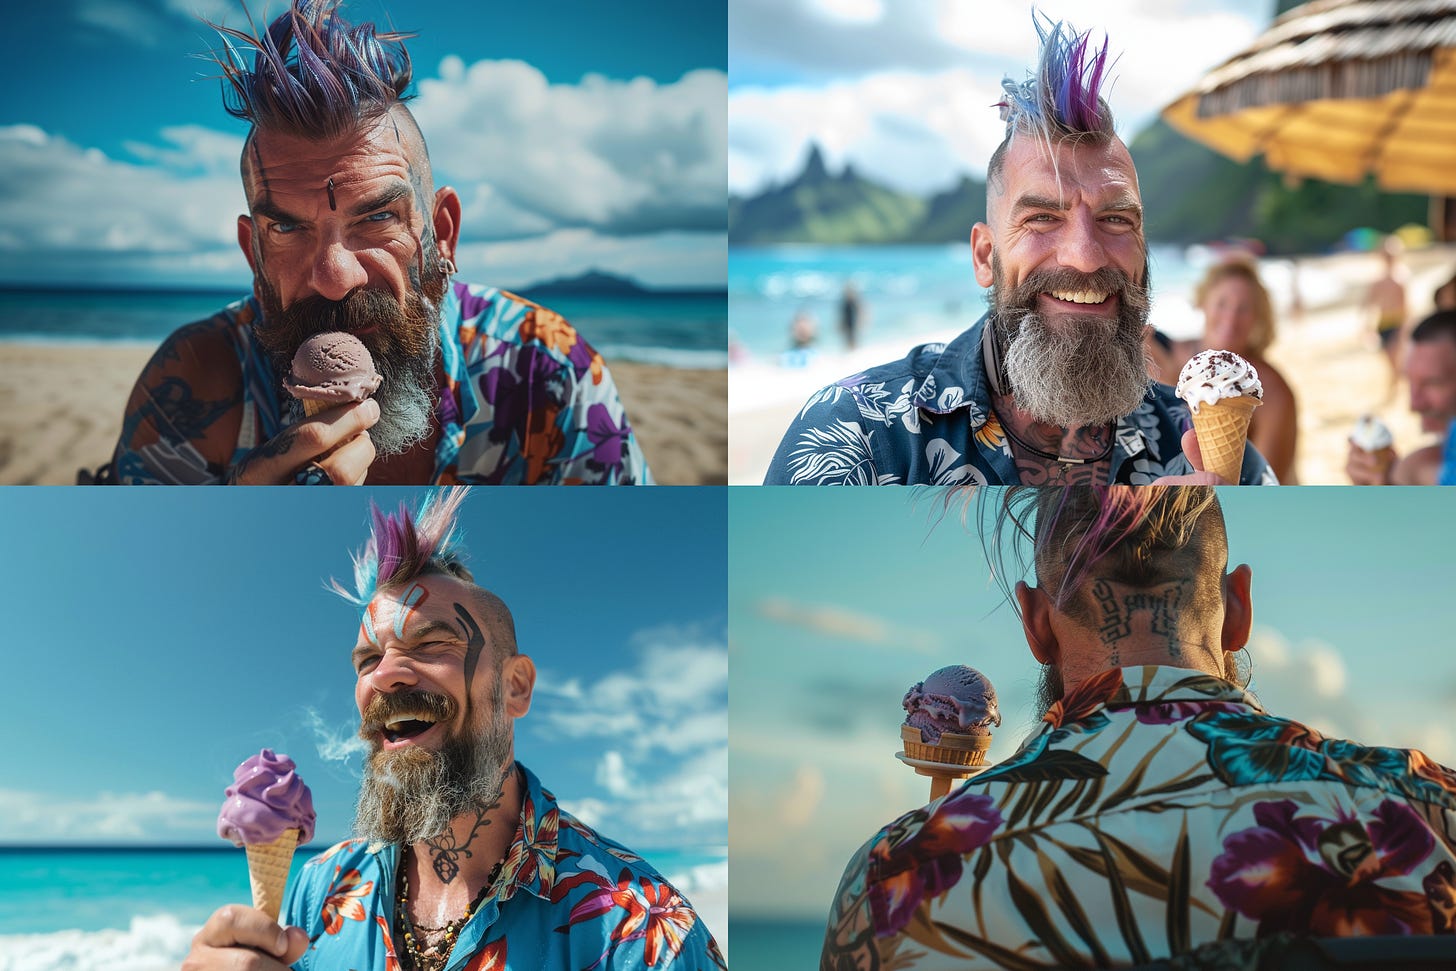 Viking eating ice cream on the beach in a Hawaiian floral shirt with purple hair and face tattoos